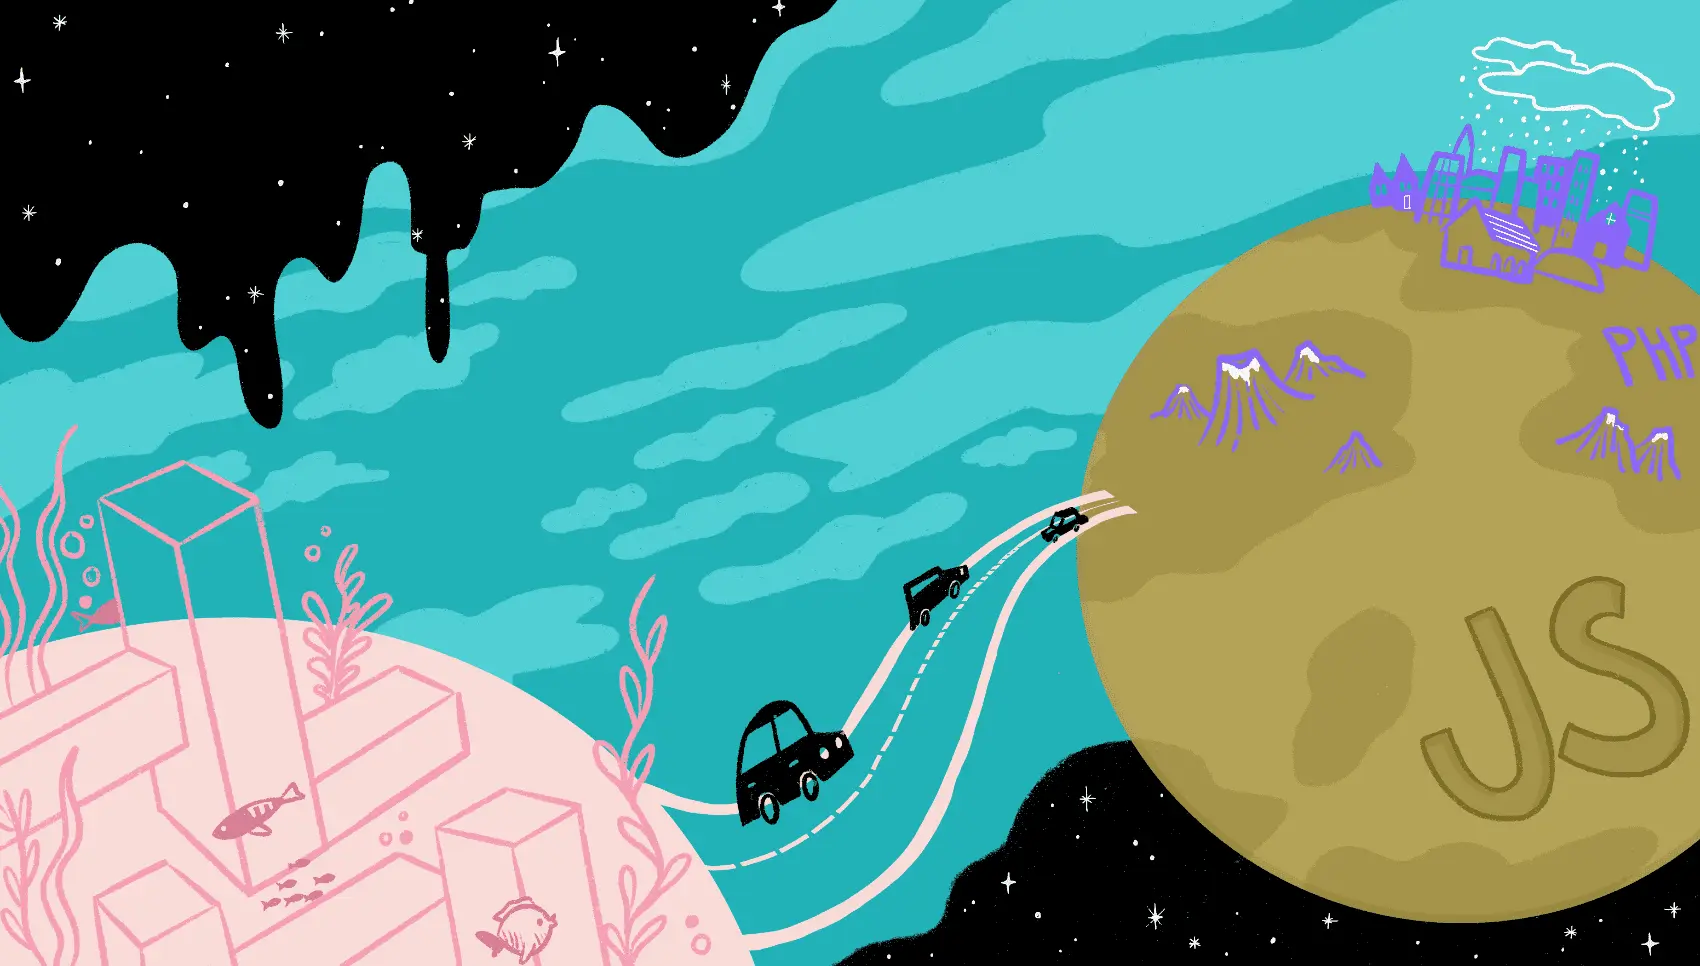 The background is set in a dark, but star-studded outerspace. Two planets are bridged together with a winding bridge, similar to two slightly-curled ribbons enclosing a highway road. The first planet to the left is aquatic with a pink hue, while the planet to the right is a terrain containing 